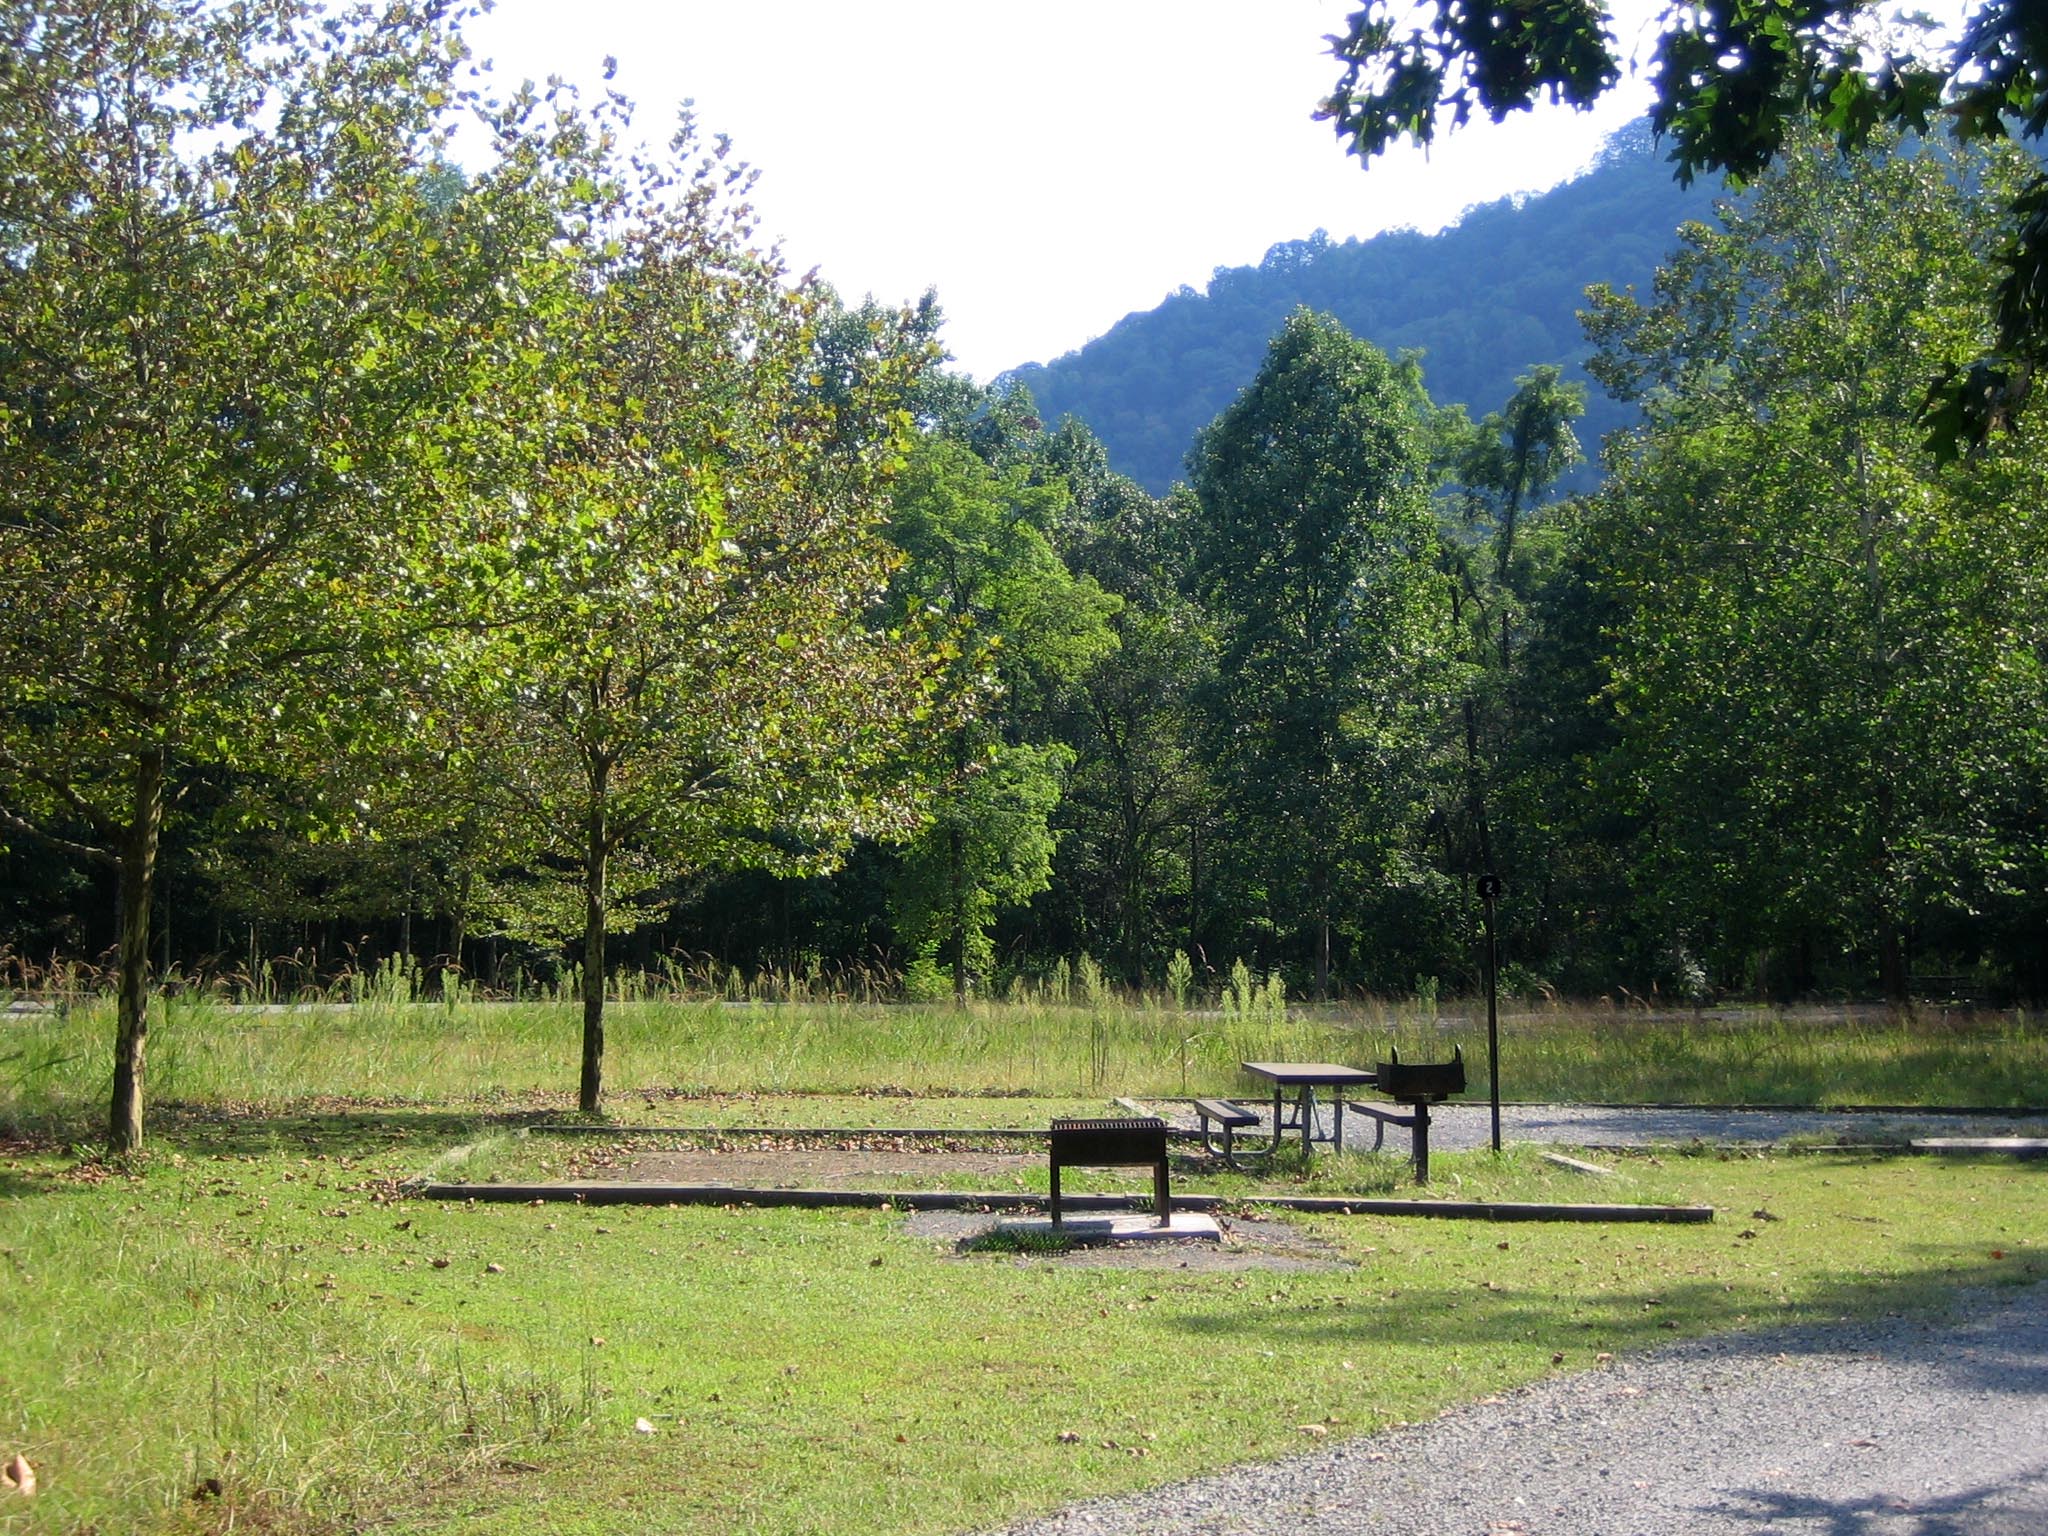 A sunny campsite in a grassy area with a picnic table and grill